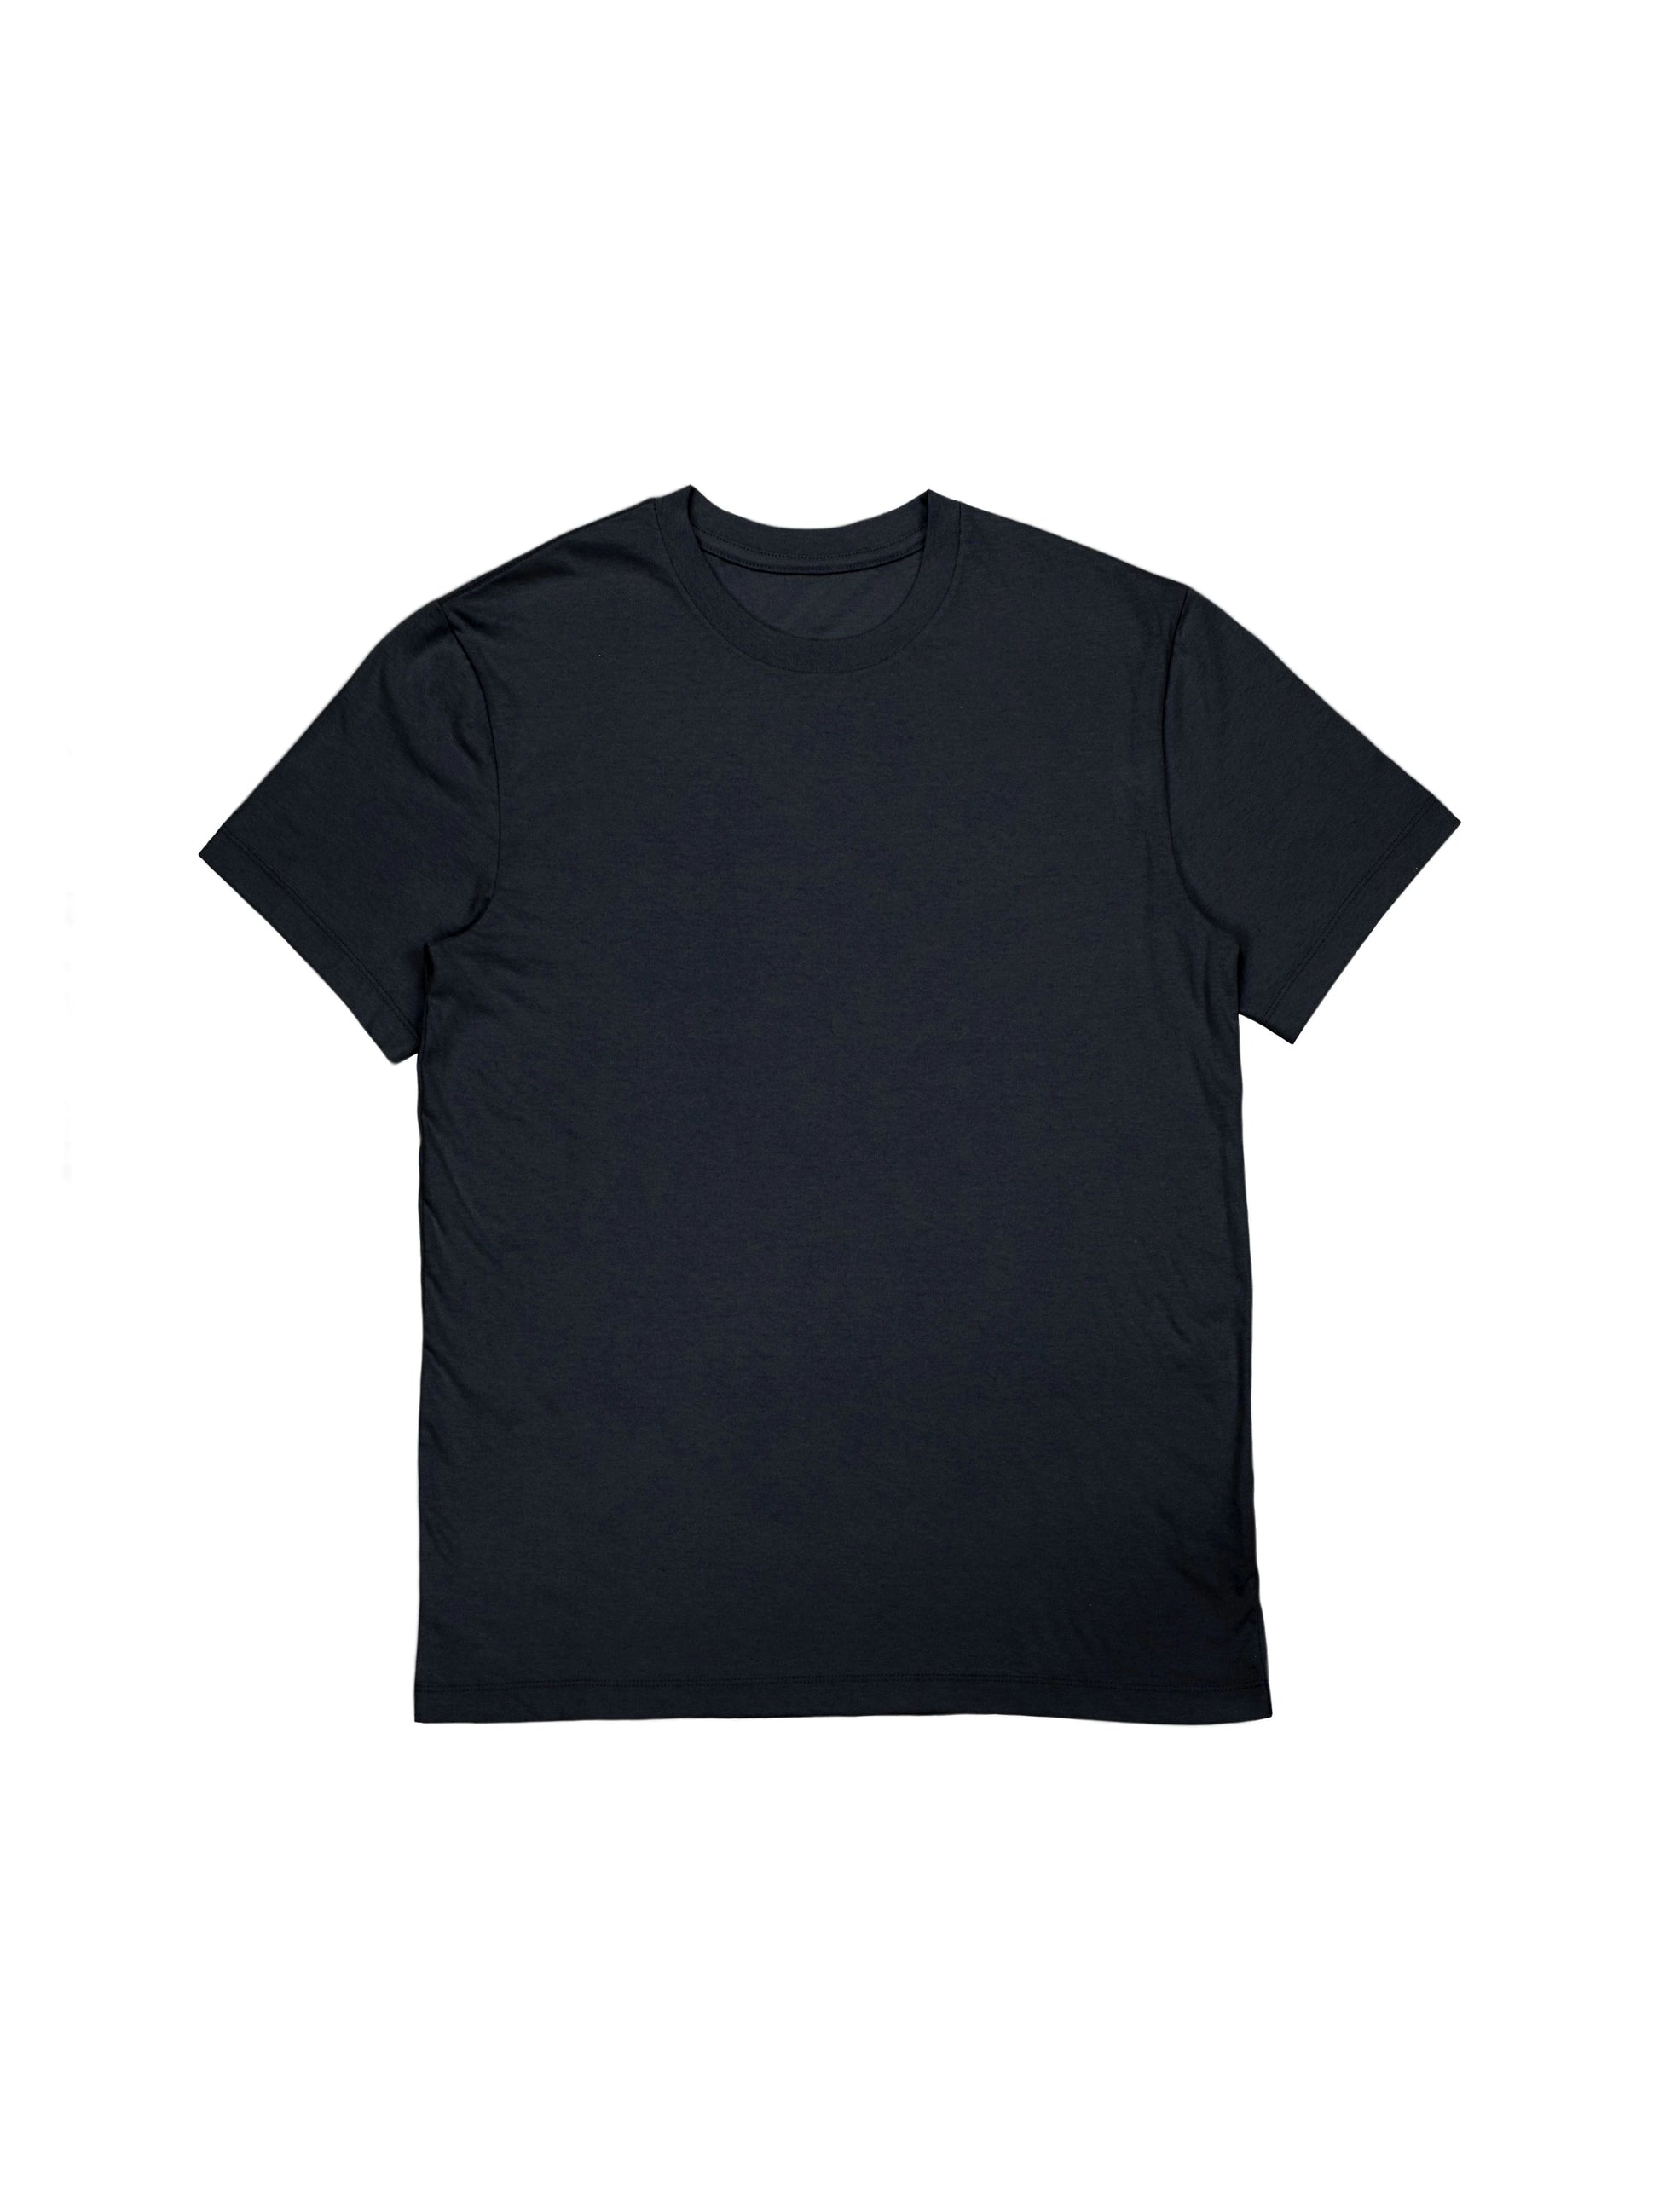 BOXY Fit Black T-Shirt Essential - 100% Organic Cotton Made In